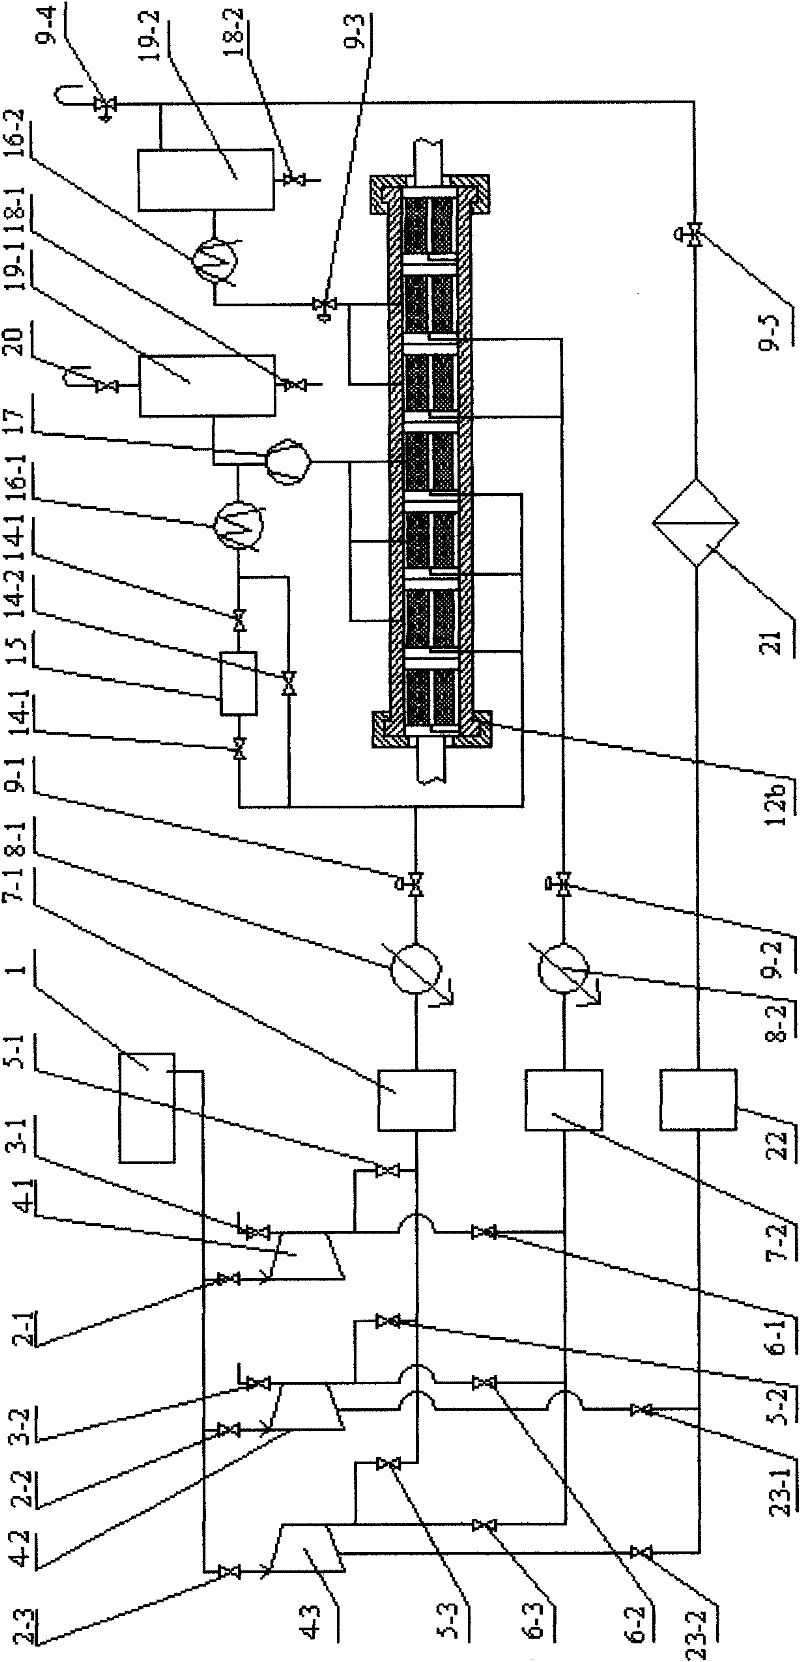 Process flow of supercritical carbon dioxide dyeing combining with urea production system